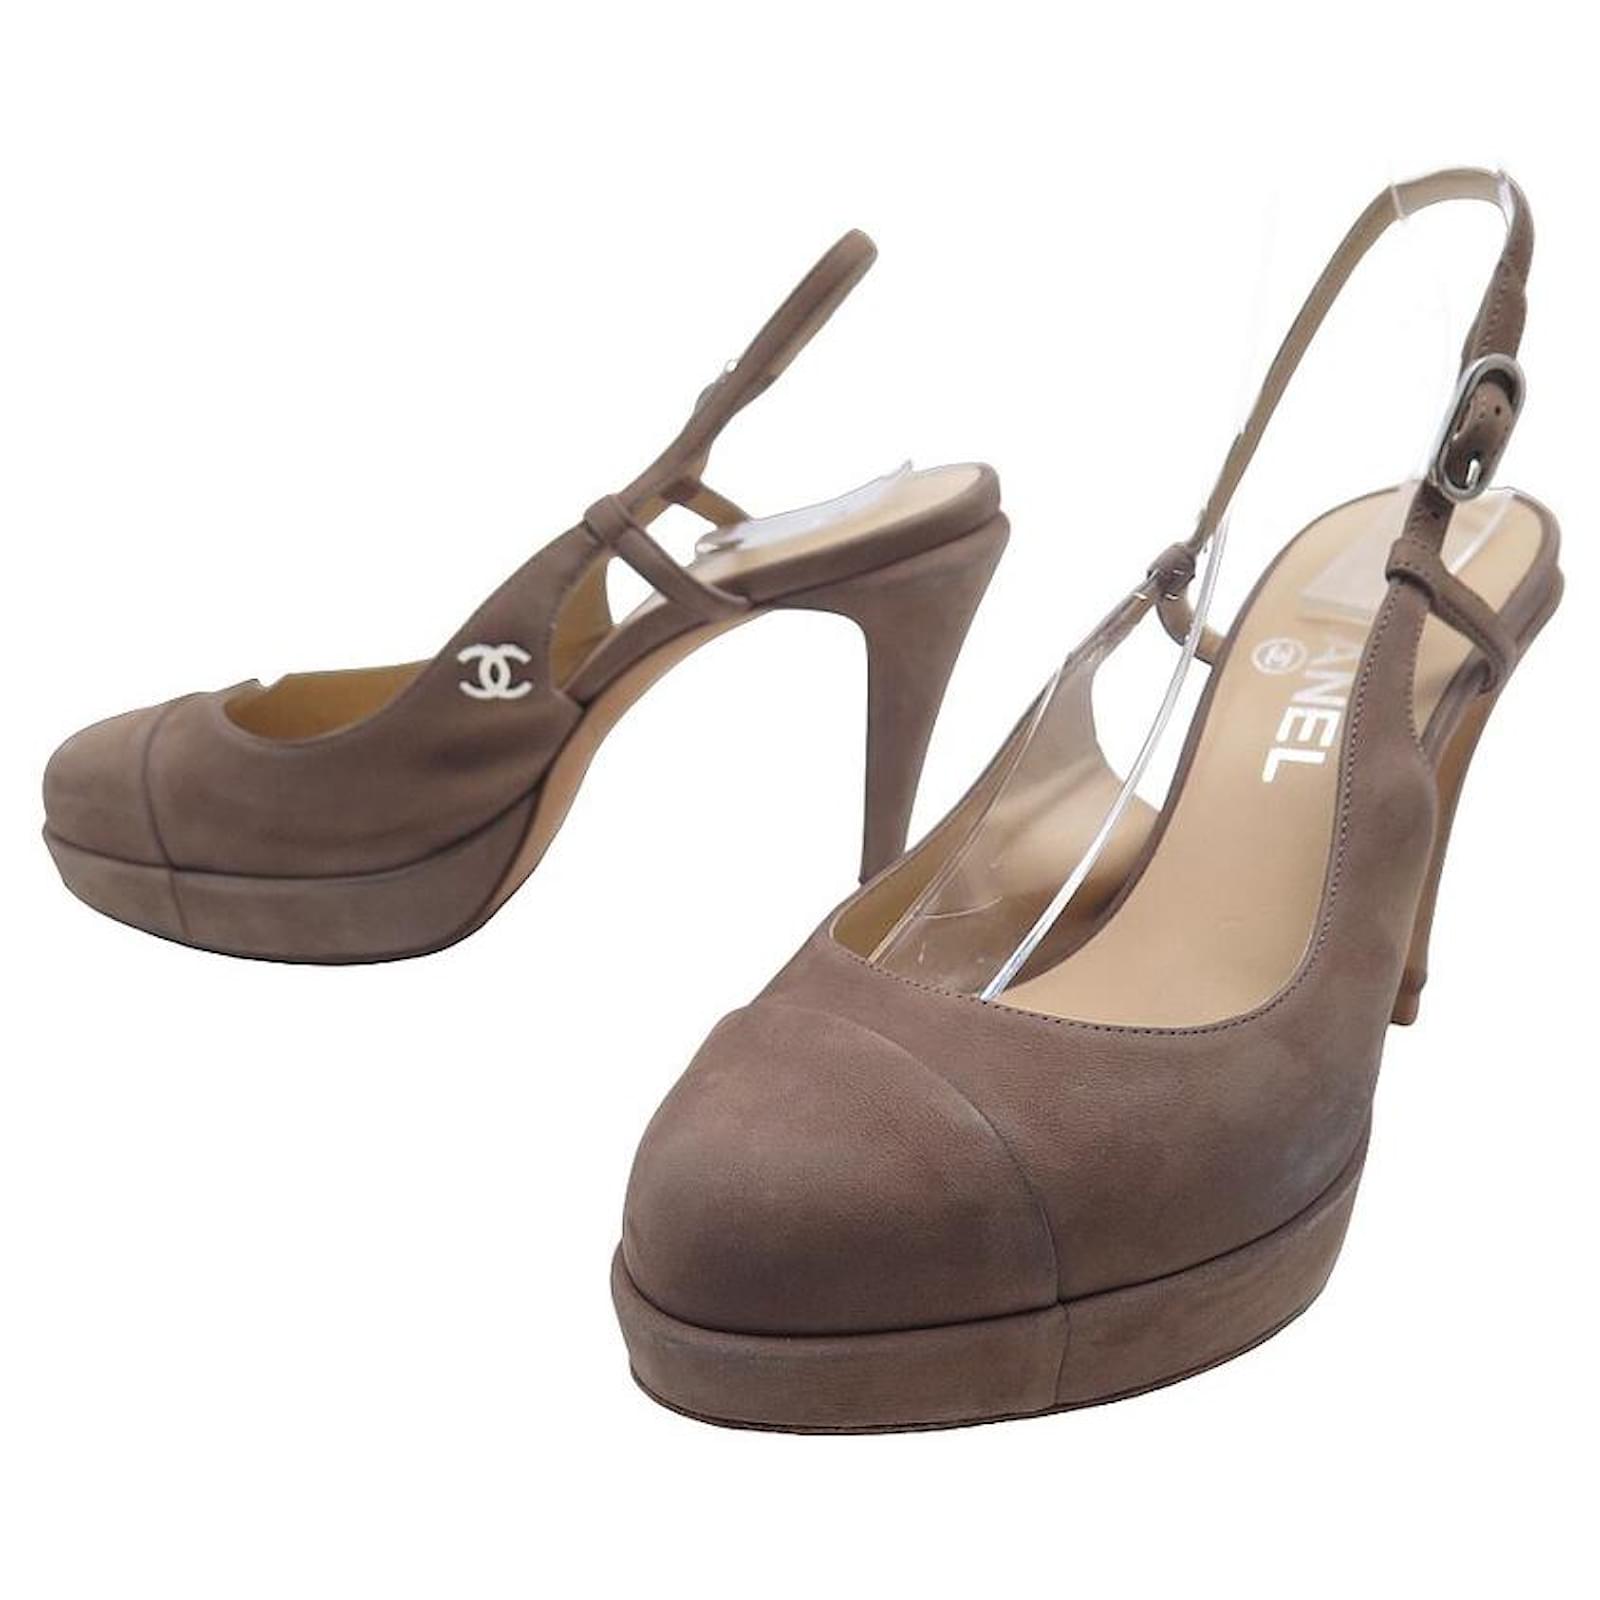 CHANEL SHOES SLINGBACK PUMPS IN TAUPE SUEDE 38 PUMPS SHOES ref